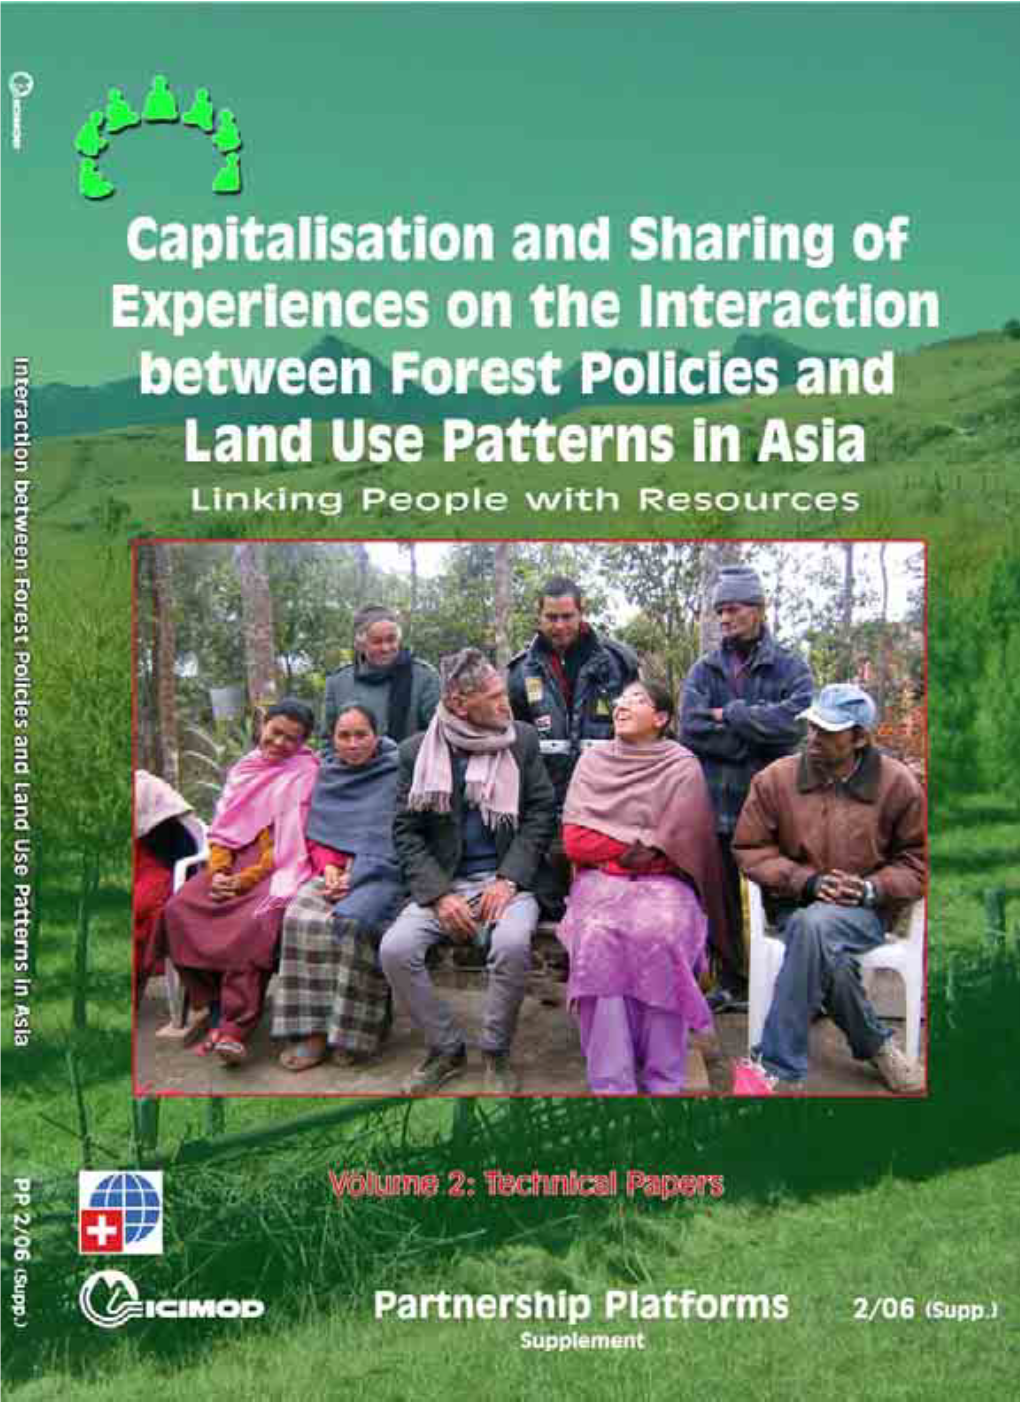 Forests and Forestry in Bhutan the Socioeconomic Role of Forests in Bhutan Forests Are an Integral Part of the Life of Traditional Bhutanese Farming Communities